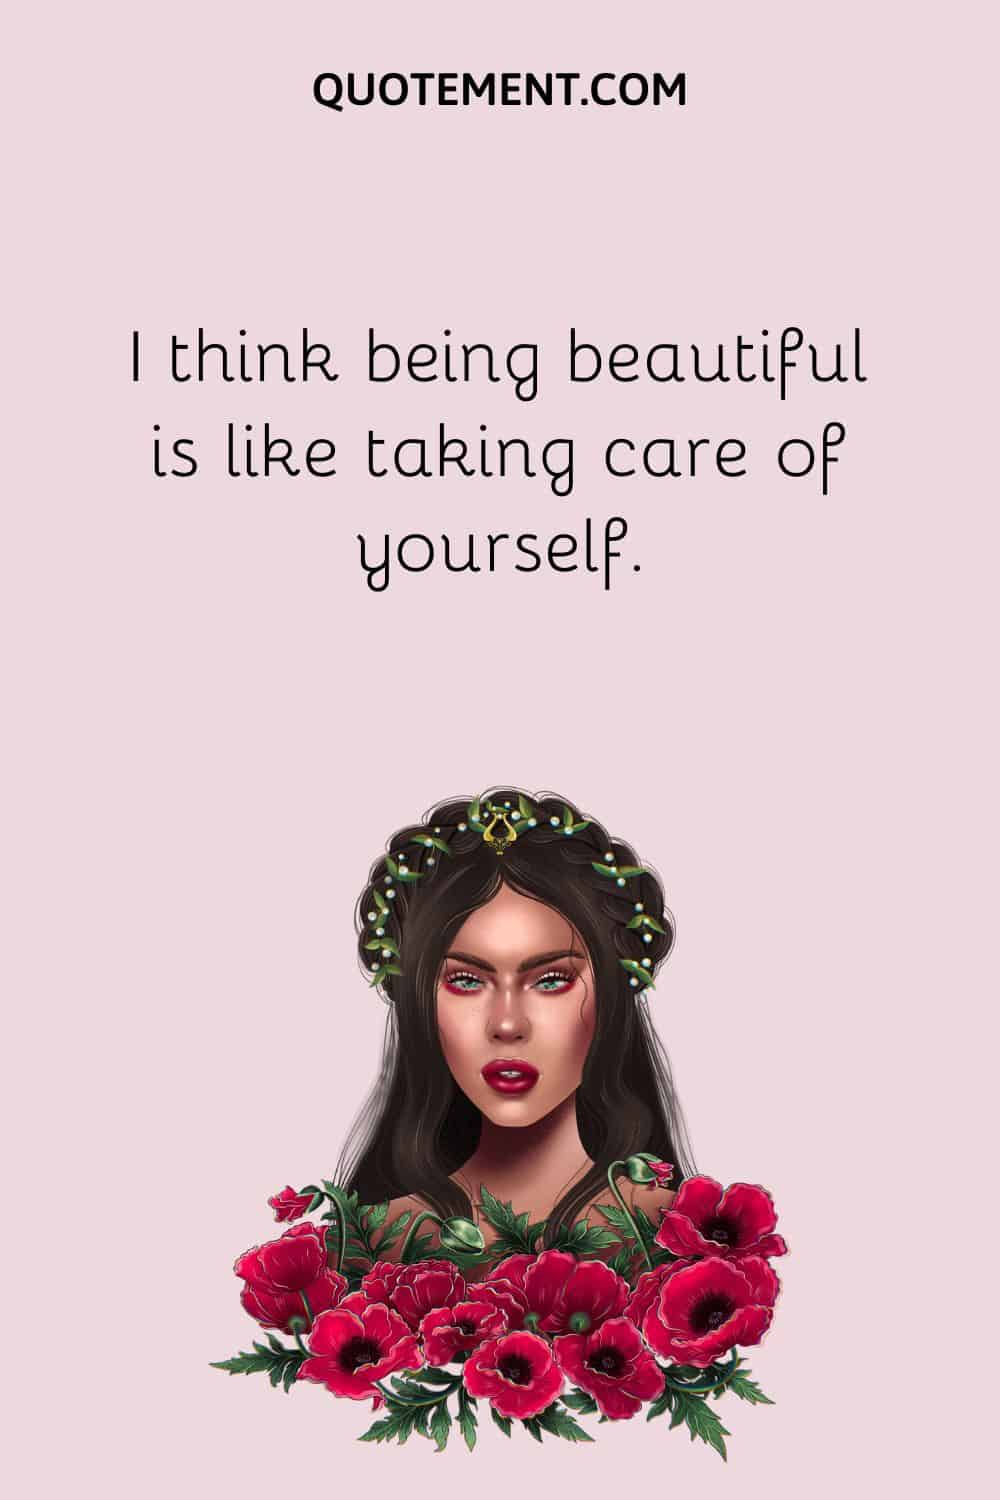 I think being beautiful is like taking care of yourself